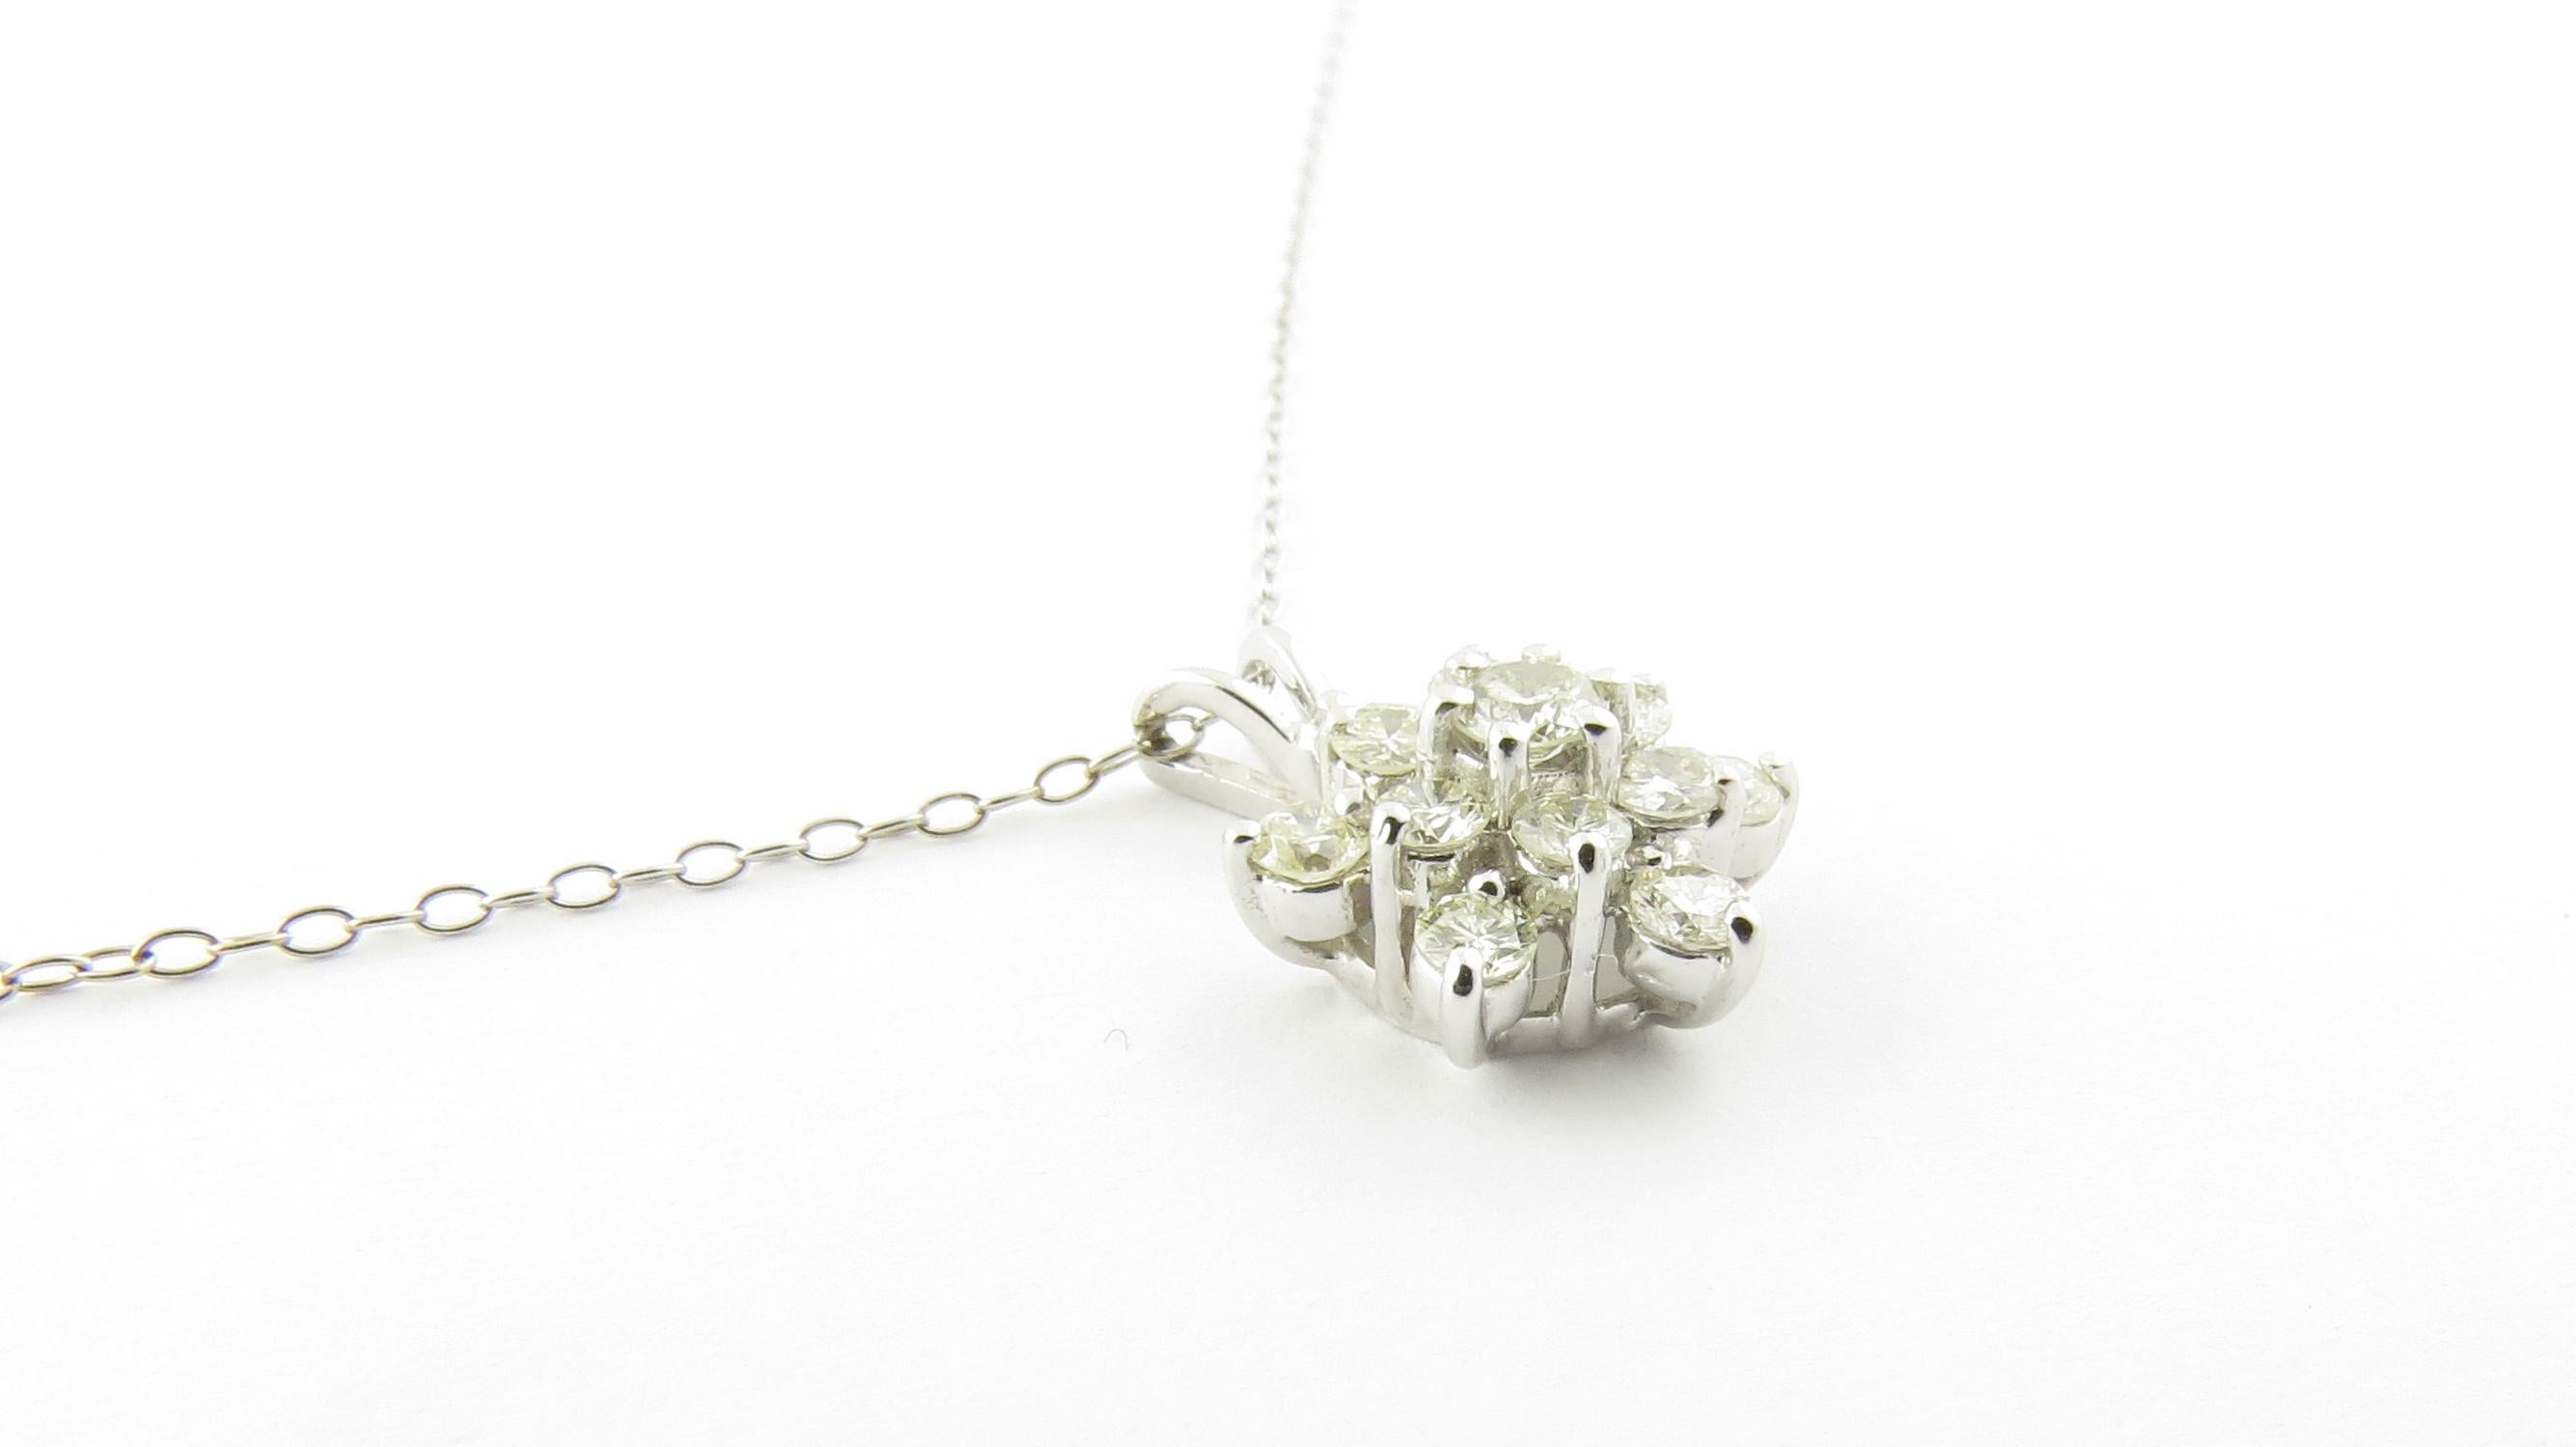 Vintage 14 Karat White Gold Diamond Pendant Necklace-

This sparkling pendant features 13 round brilliant cut diamonds (center: .08 ct., surrounding: .03 ct each) set in beautifully detailed 14K white gold. Suspended from a classic 14K white gold